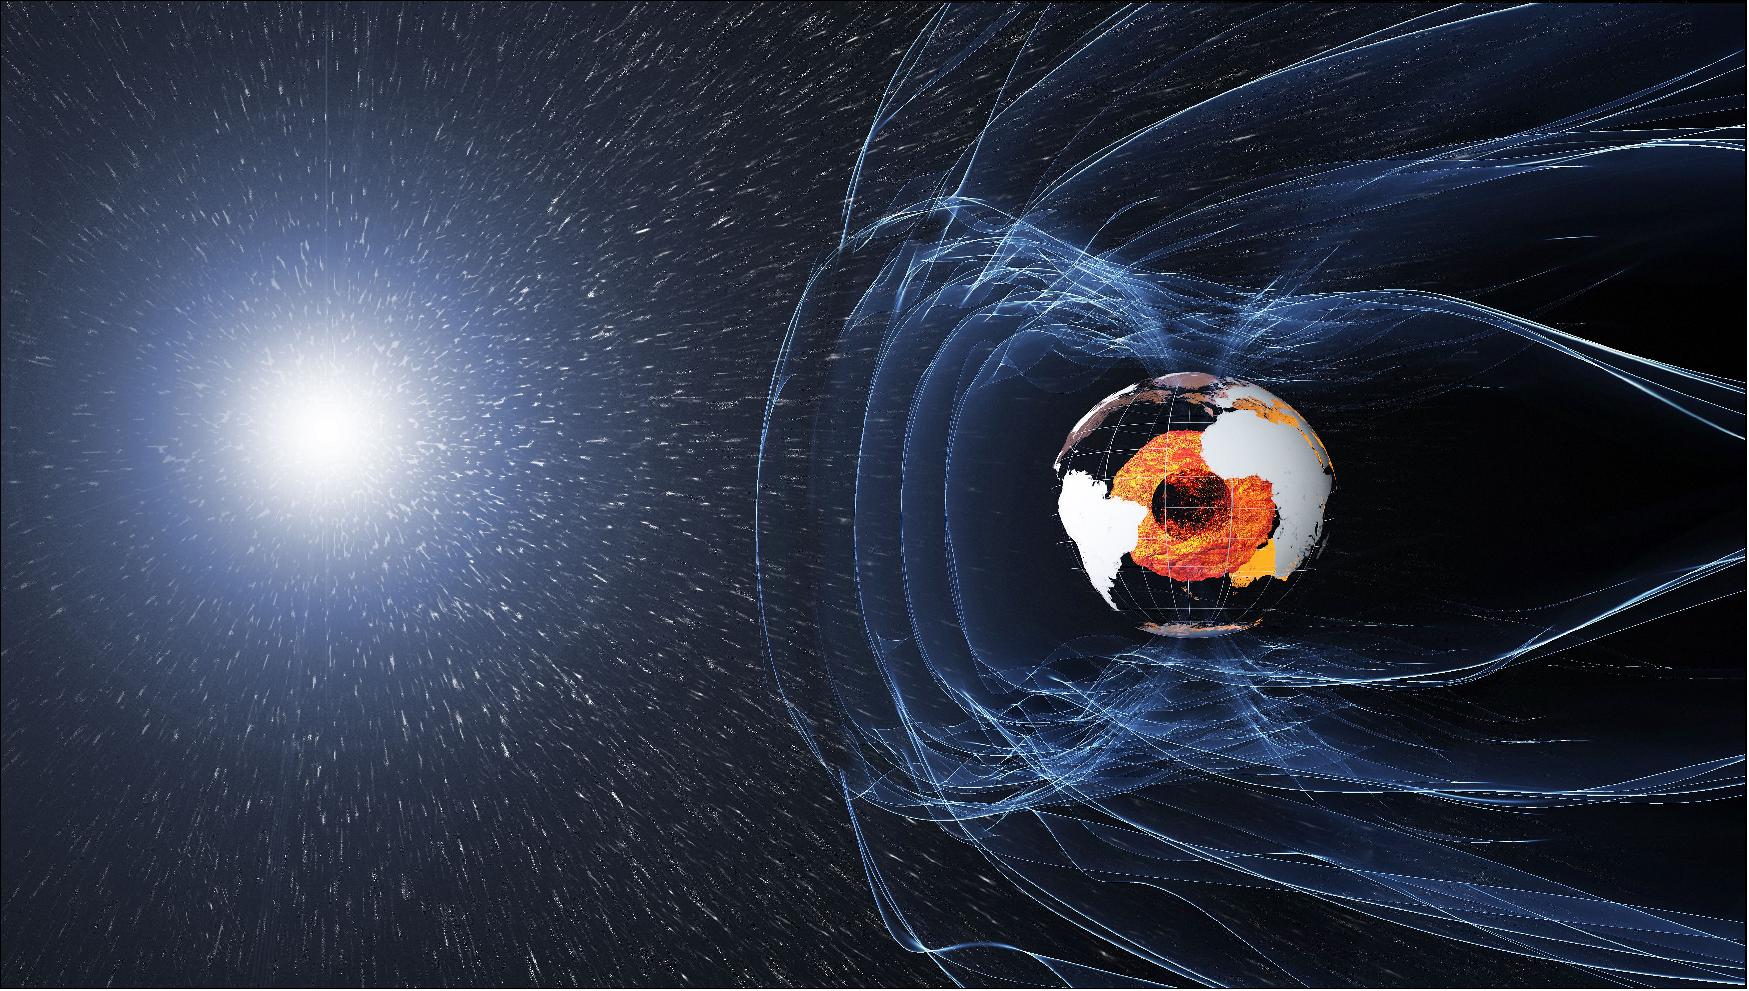 Figure 71: The force that protects our planet. The magnetic field and electric currents in and around Earth generate complex forces that have immeasurable impact on every day life. The field can be thought of as a huge bubble, protecting us from cosmic radiation and charged particles that bombard Earth in solar winds (image credit: ESA/ATG medialab)